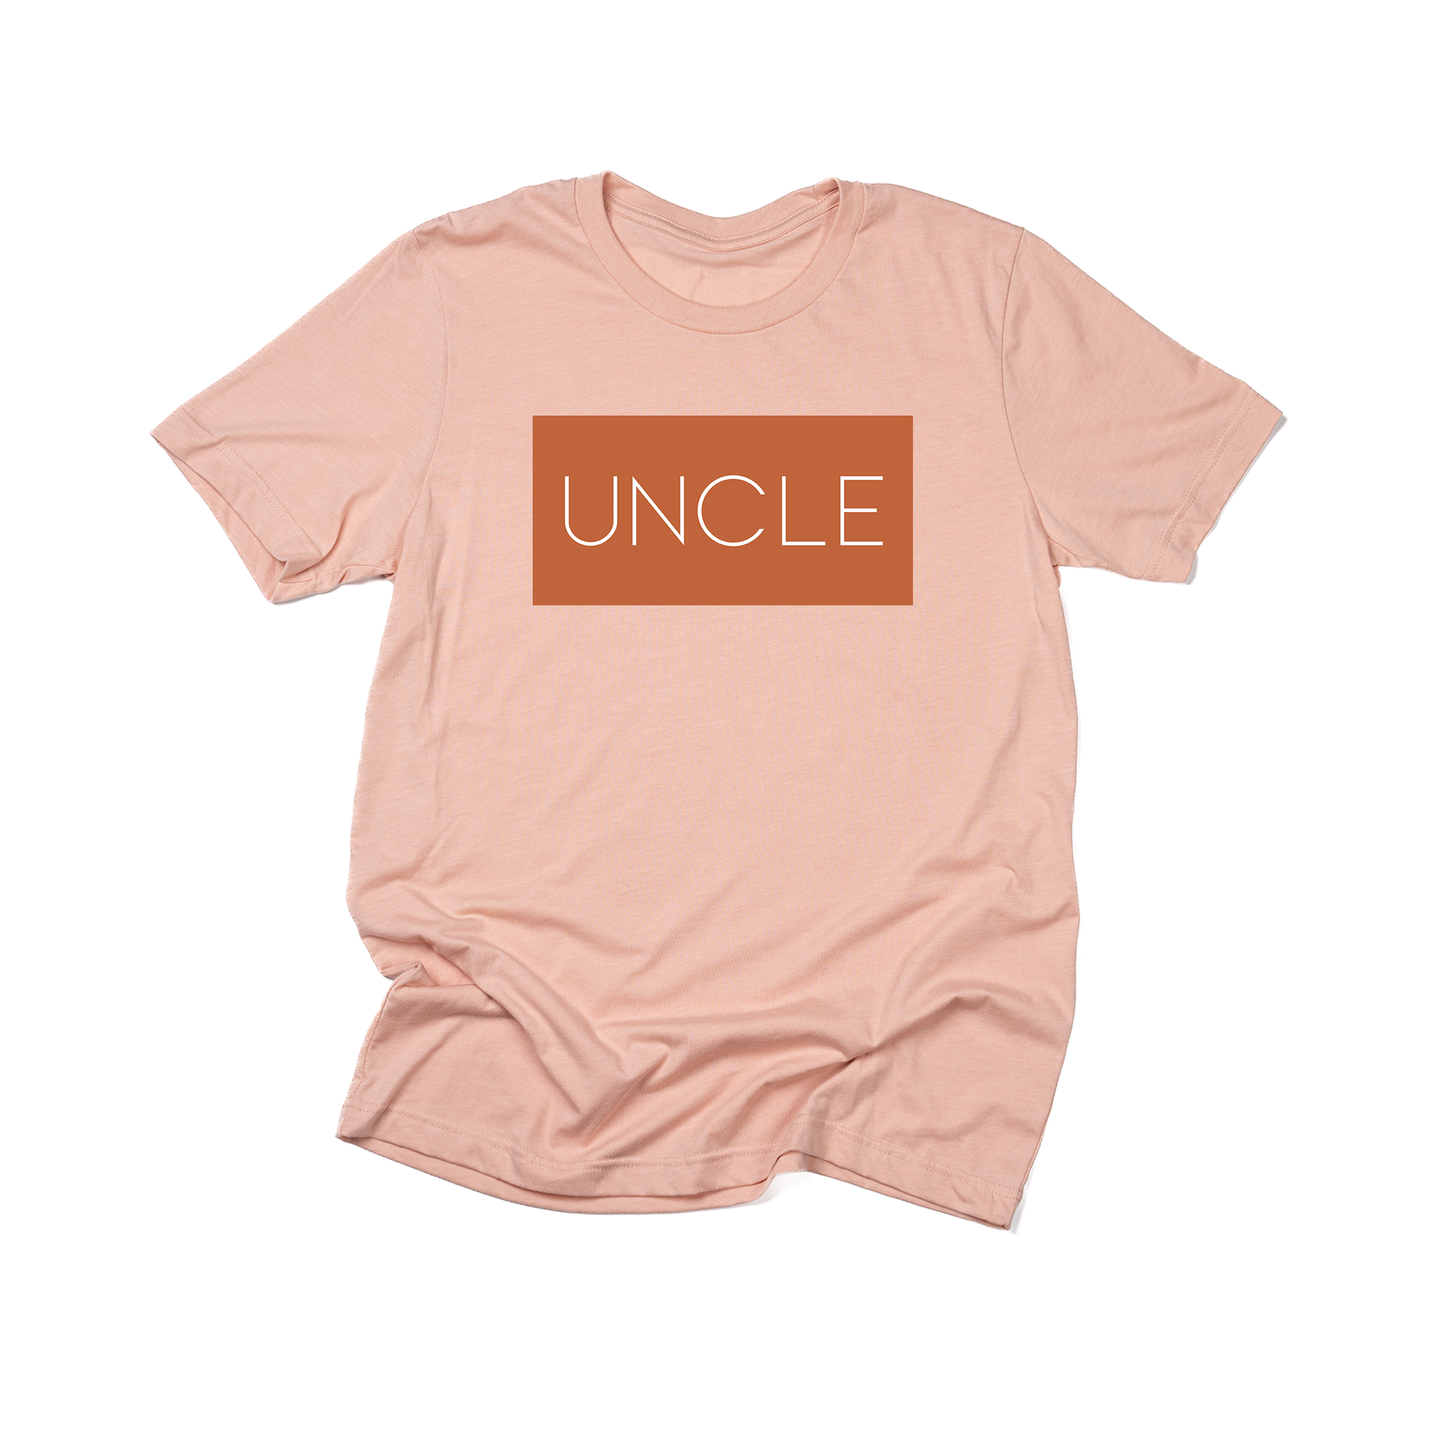 Uncle (Boxed Collection, Rust Box/White Text, Across Front) - Tee (Peach)